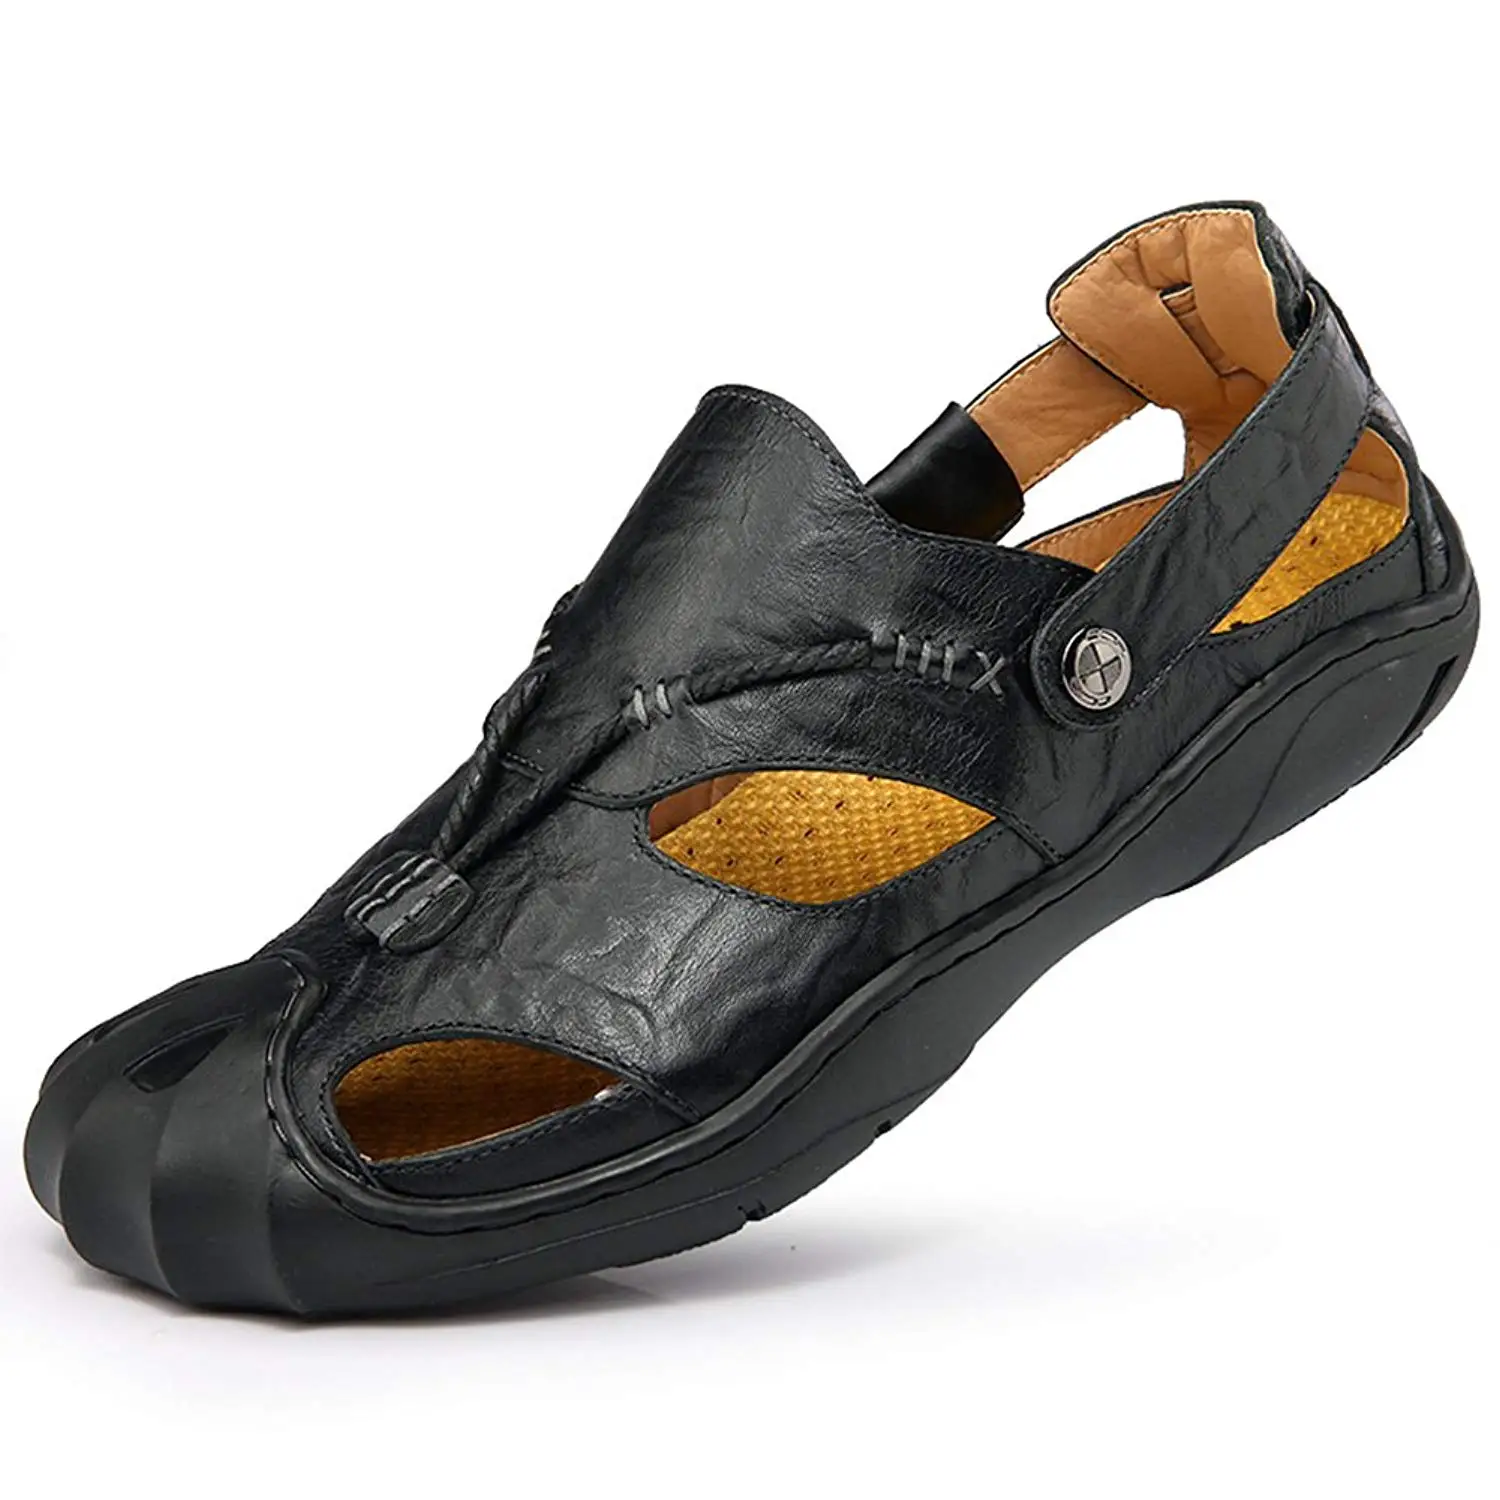 Cheap Mens Leather Sandals Closed Toe, find Mens Leather Sandals Closed ...